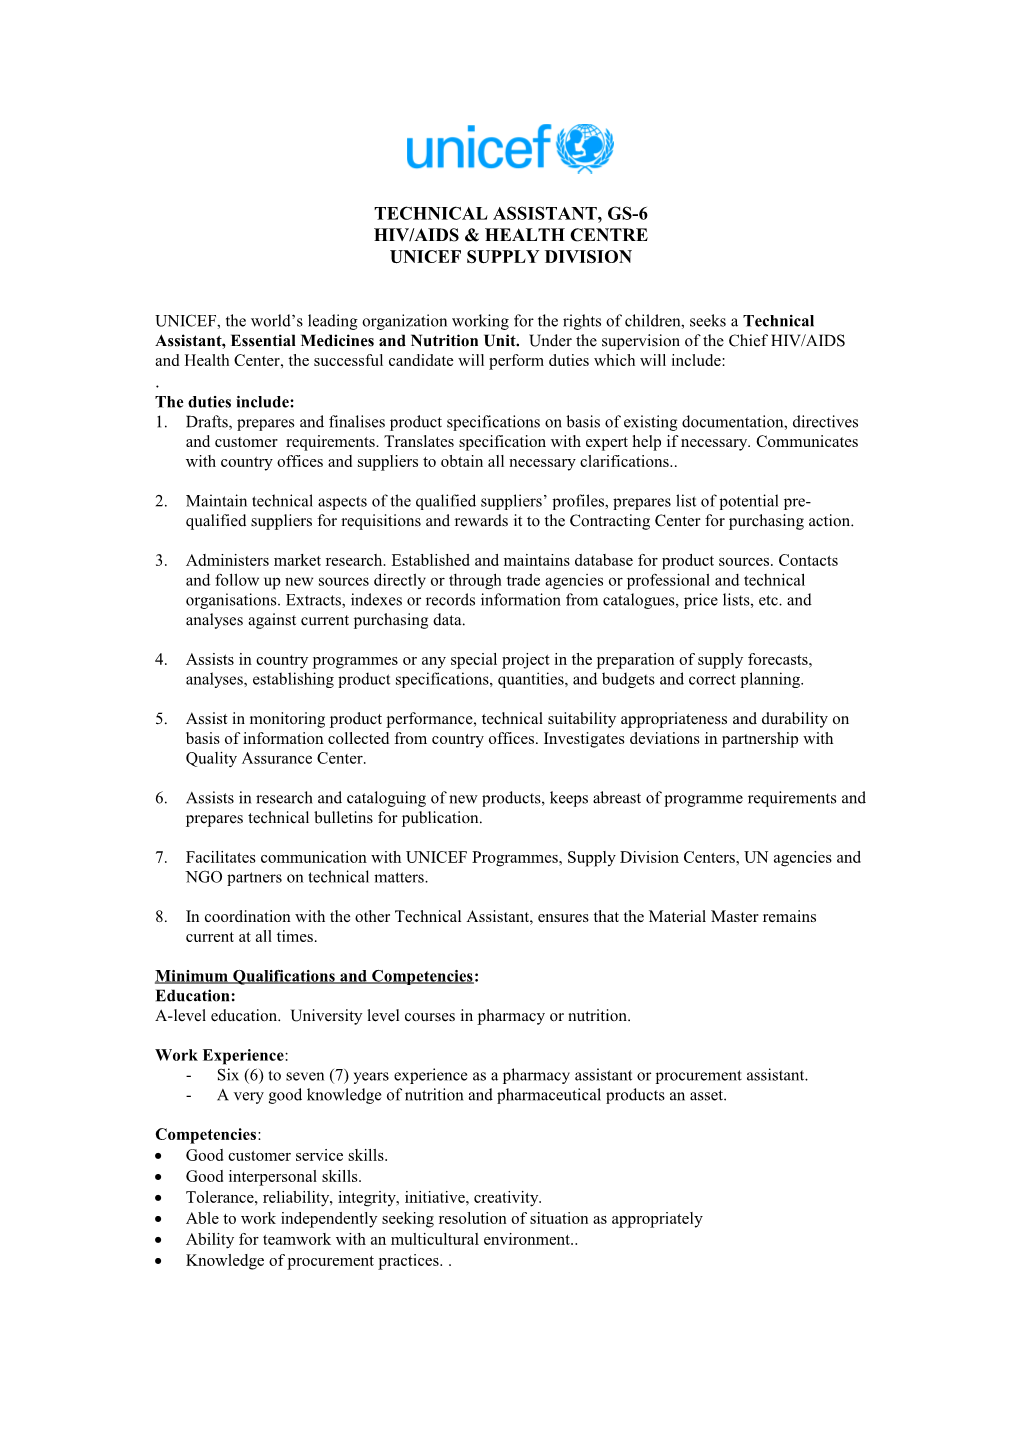 Technical Assistant, Essential Medicines and Nutrition Unit